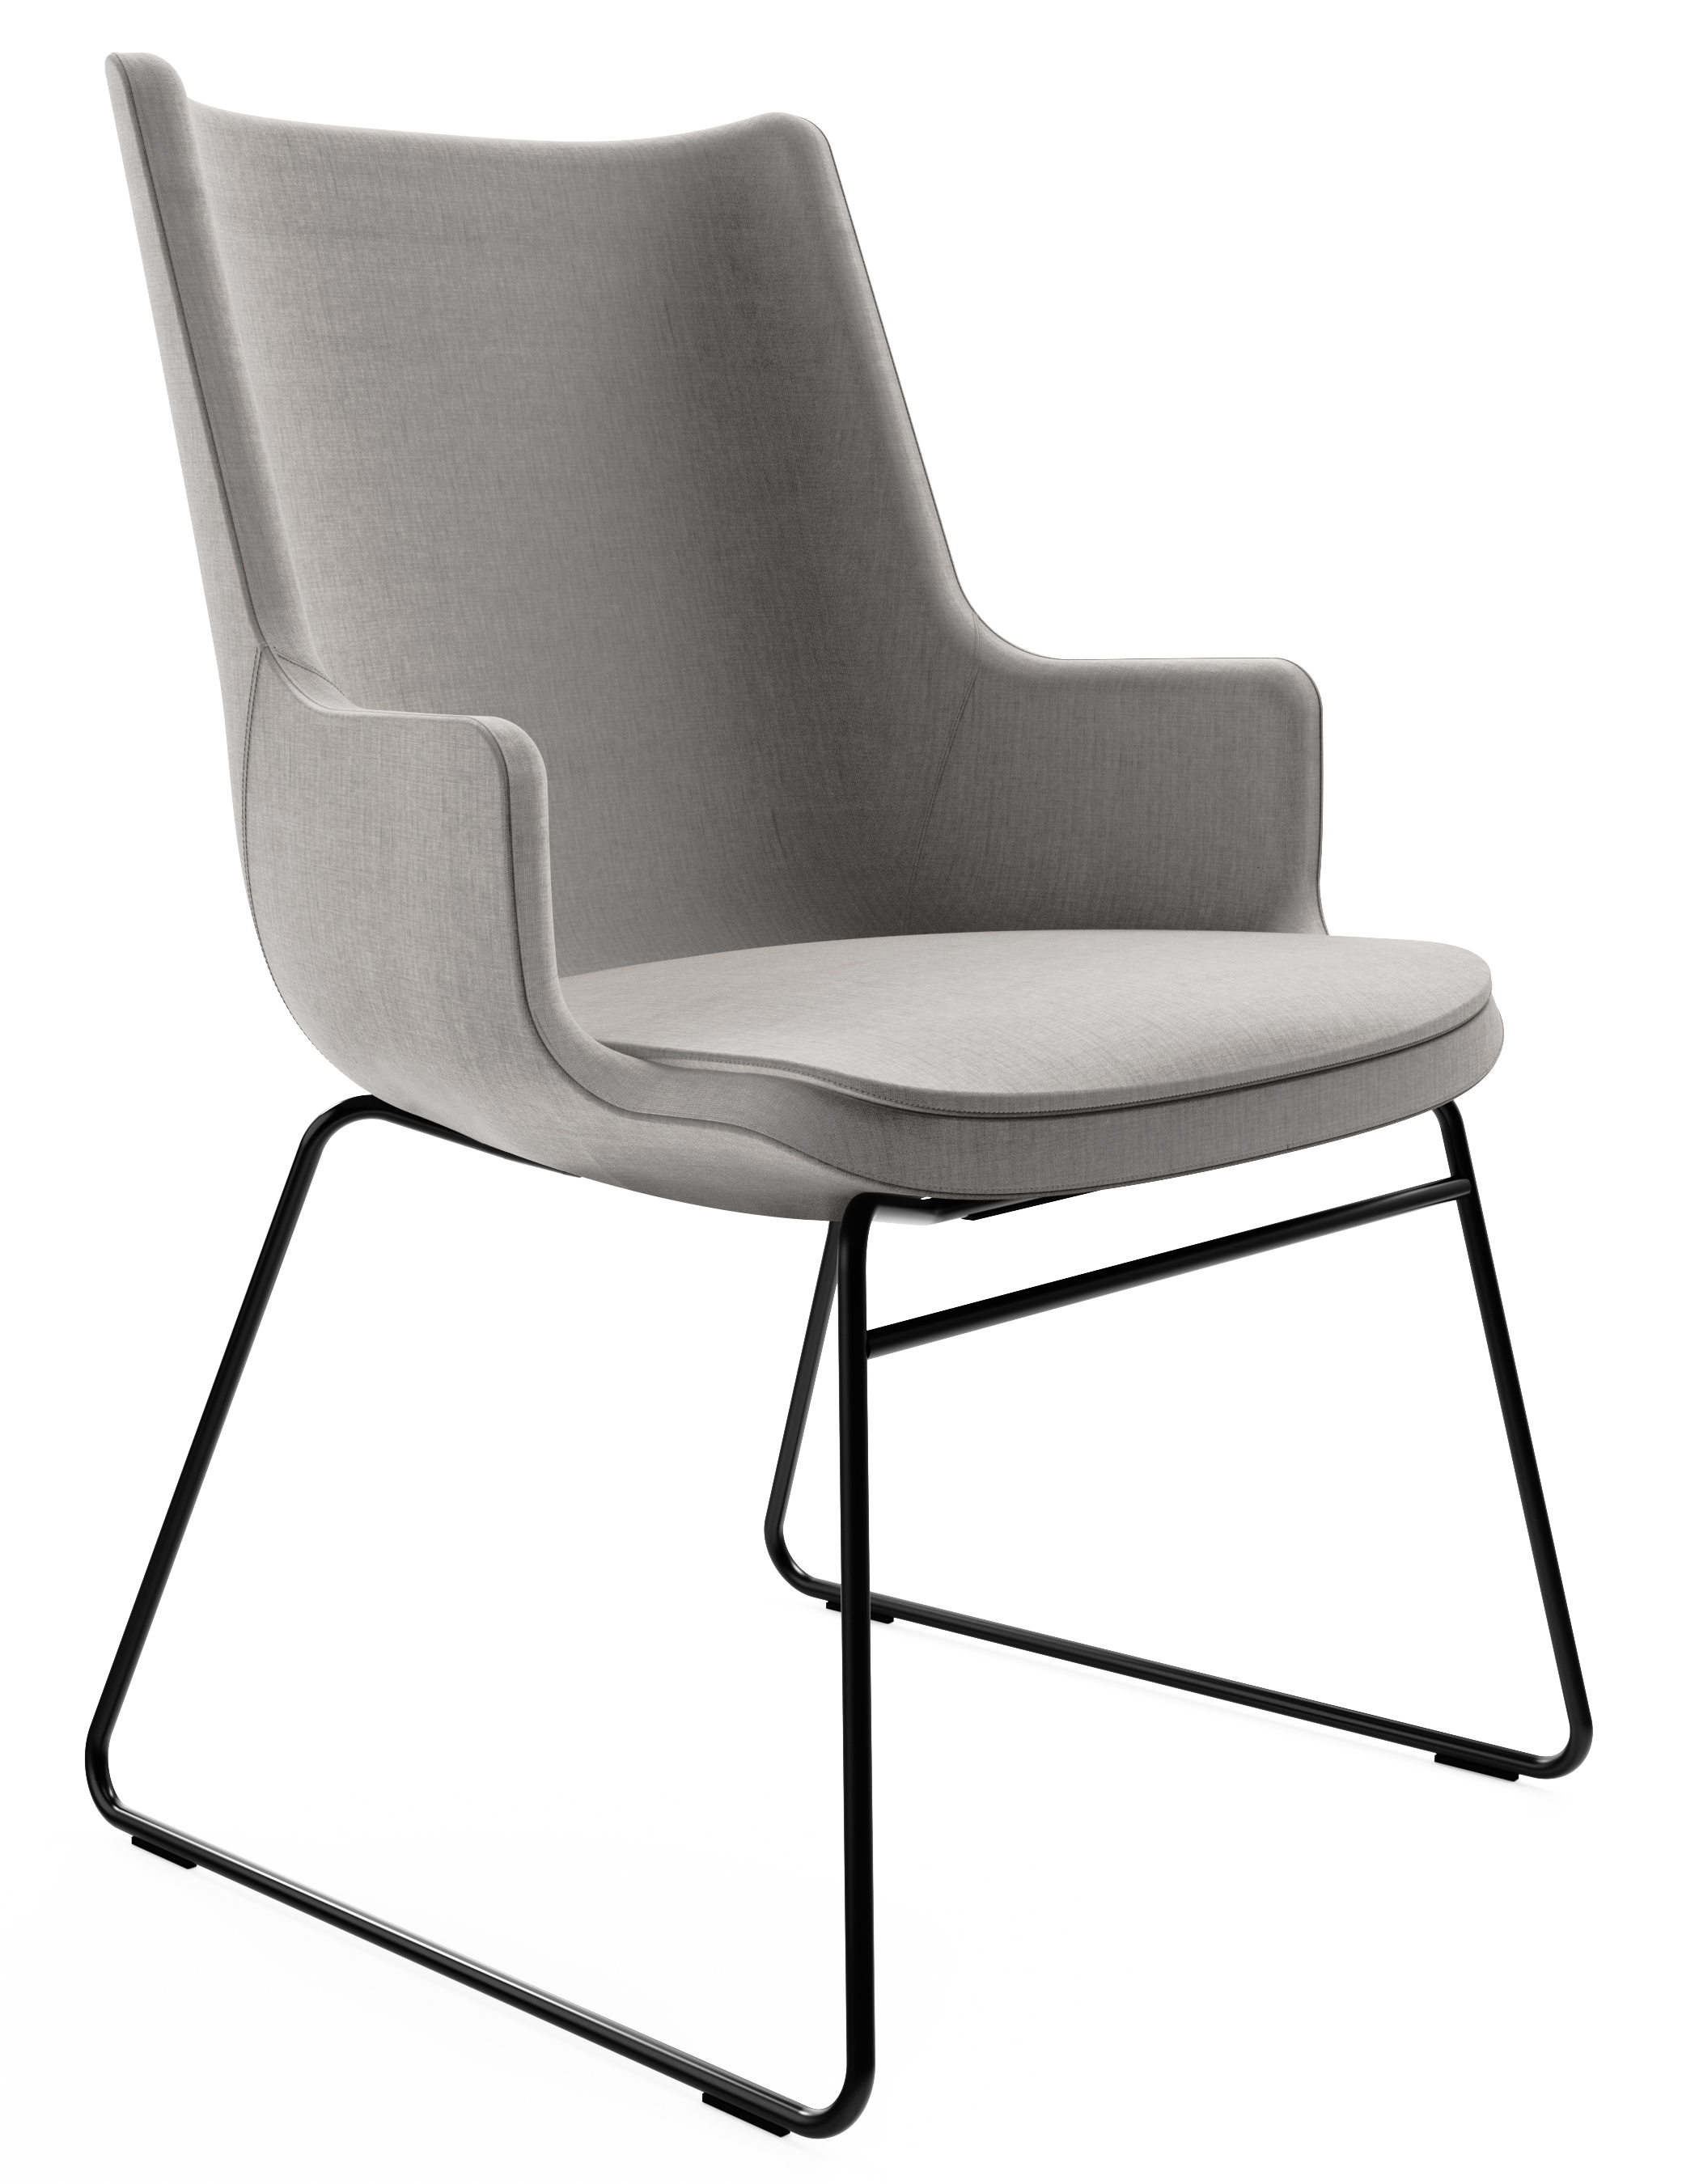 WS - Contour chair - Mid, Sled black base (Front angle)